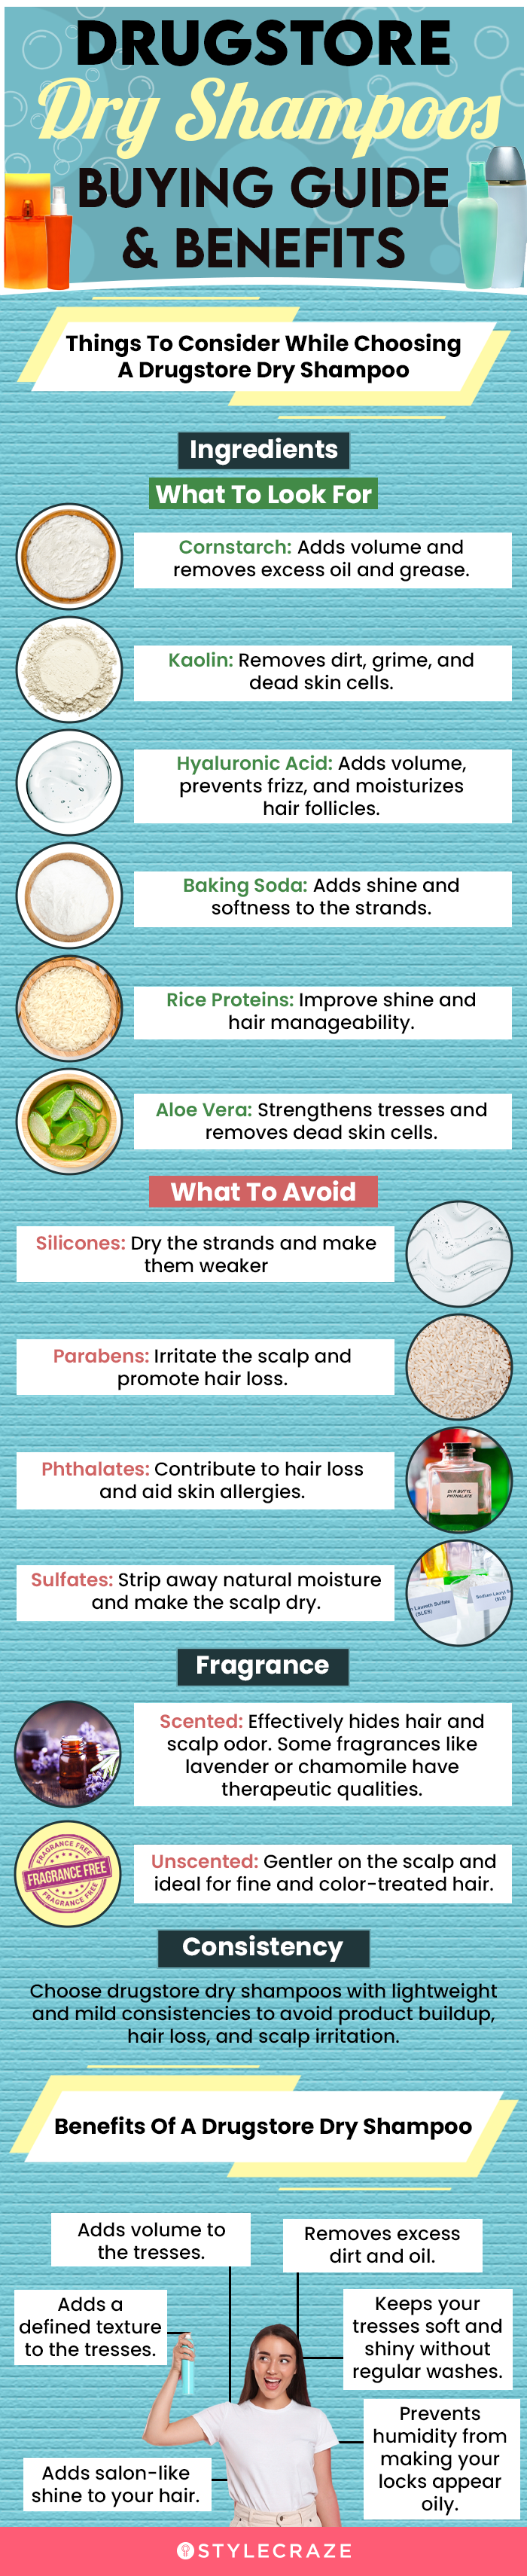 Drugstore Dry Shampoos: Buying Guide & Benefits (infographic)